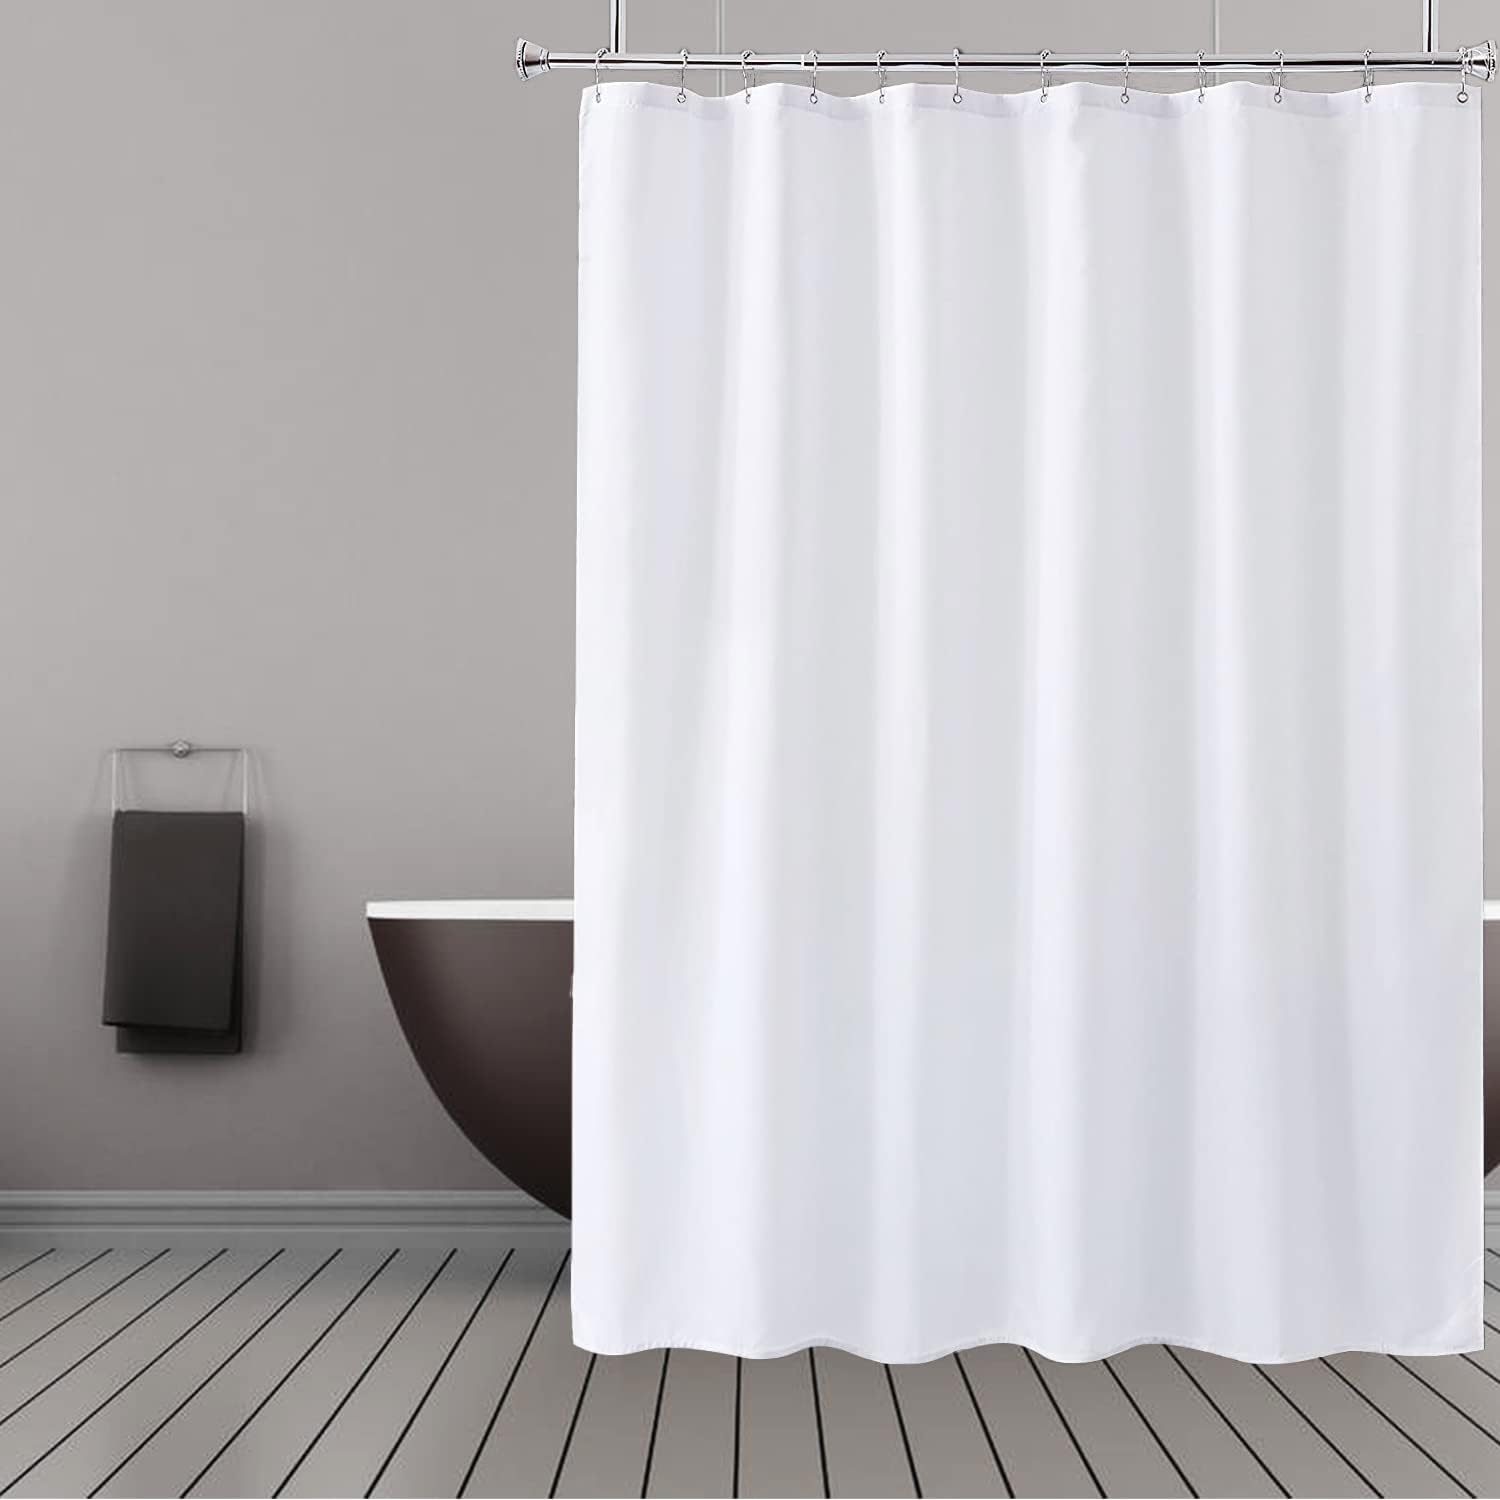 BSLINER Fabric Shower Curtain Liner with Hem Weighted [...]